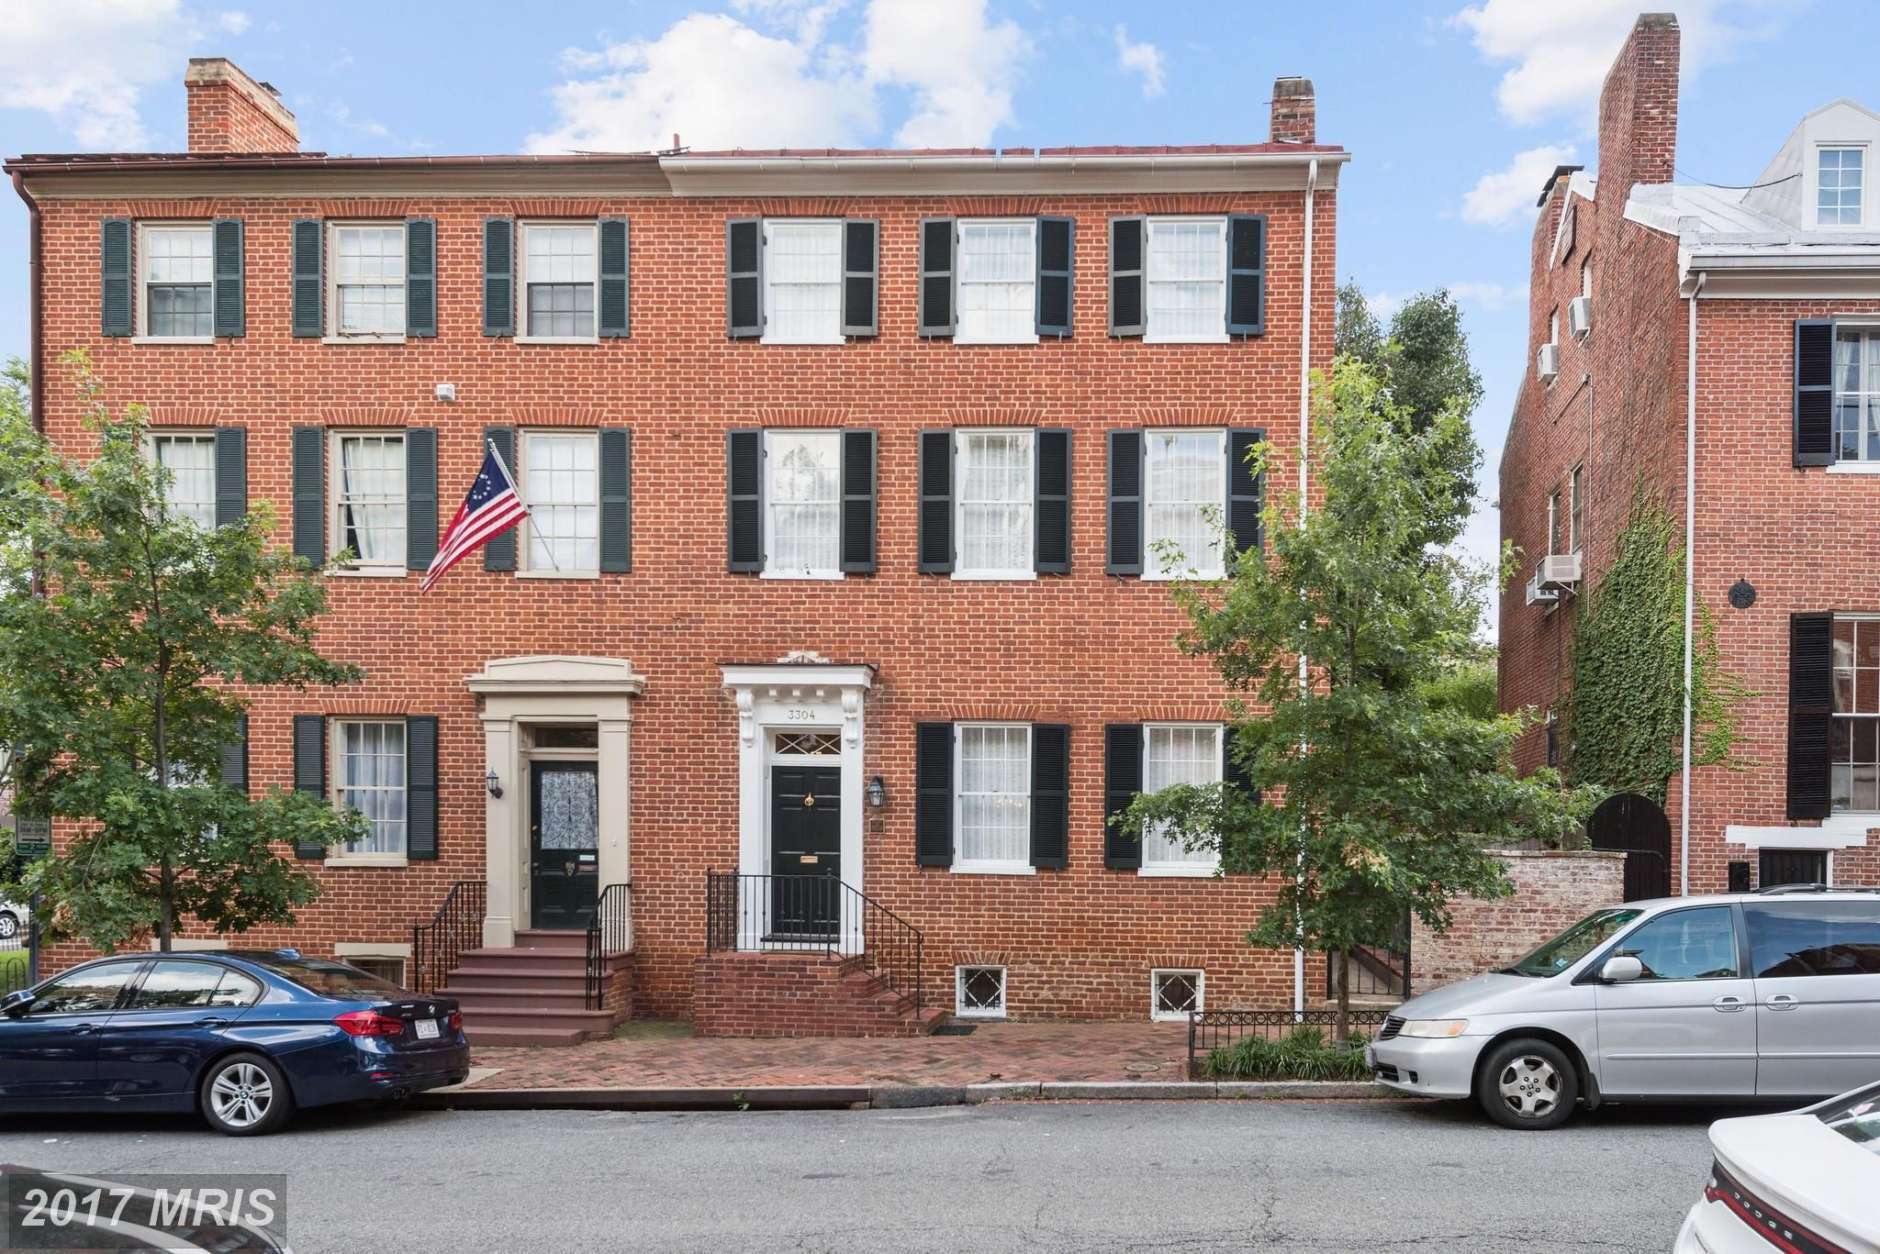 3304 N Street NW in D.C. sold for $4 million. (Courtesy Bright MLS)